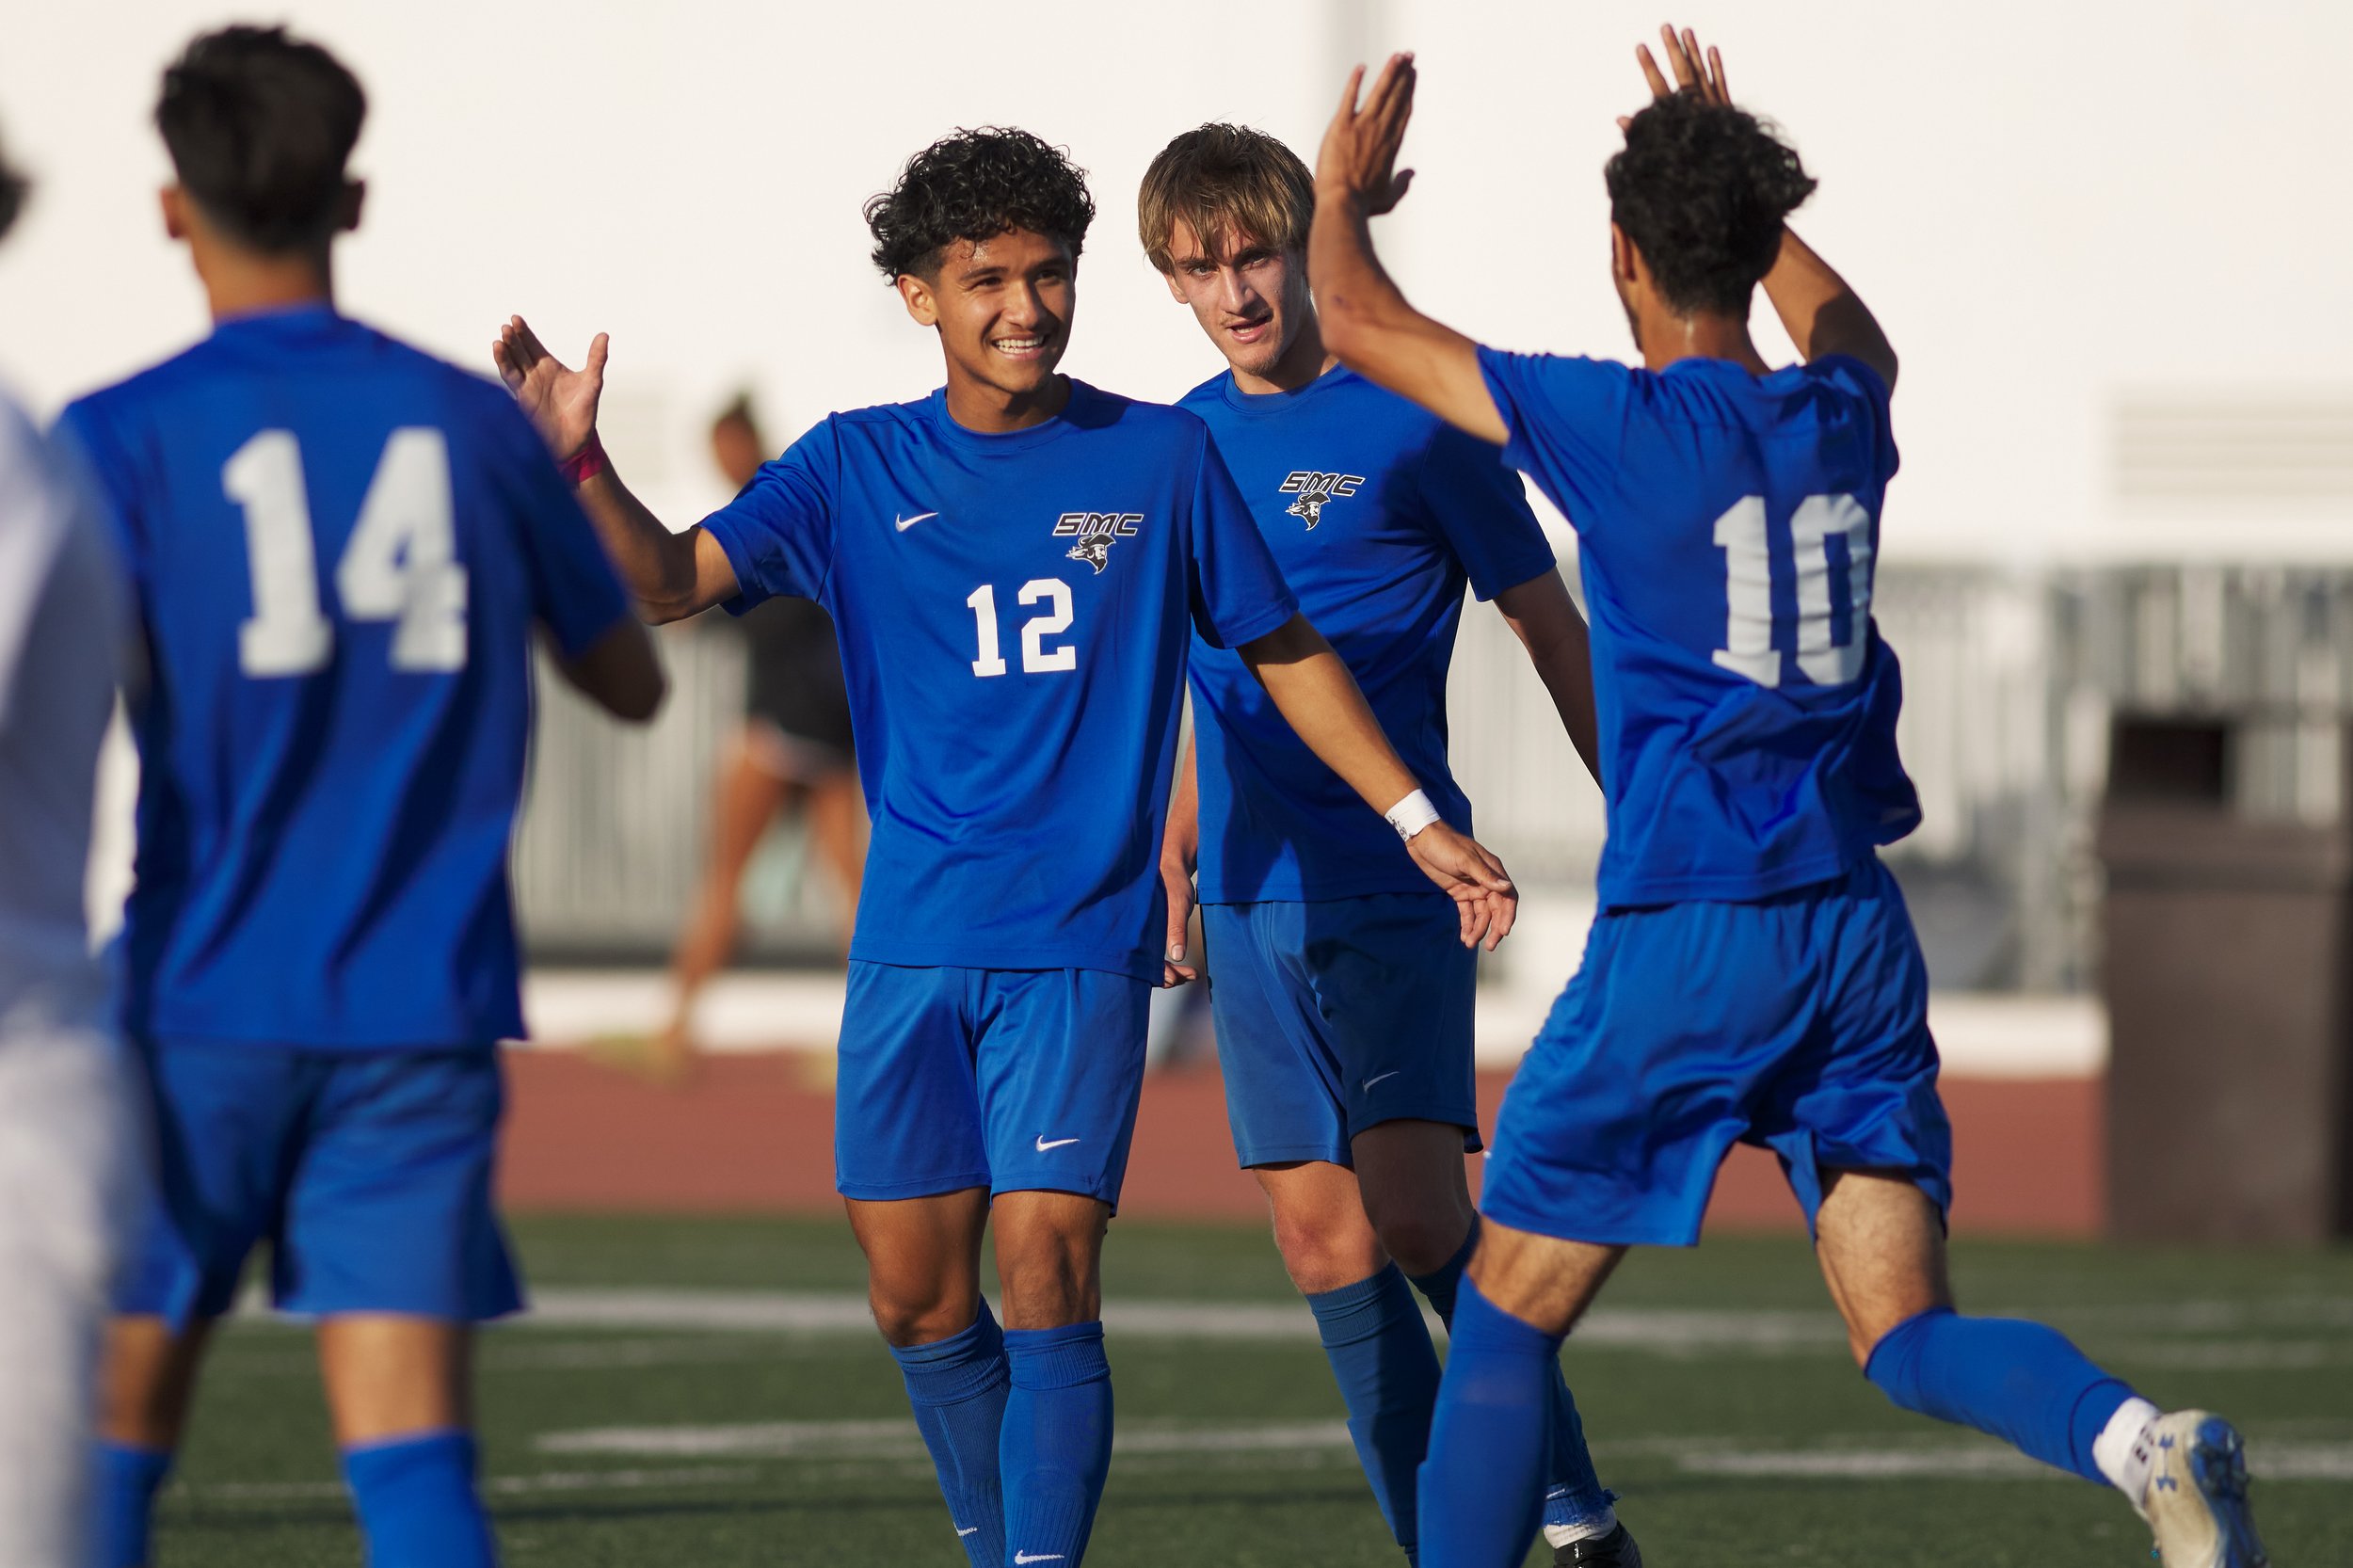  Santa Monica College Corsairs' Jason Moreno, Darren Lewis, and Roey Kivity gather after Moreno's goal during the men's soccer match against the Moorpark College Raiders on Thursday, Nov. 9, 2023, at Corsair Field in Santa Monica, Calif. The Corsairs